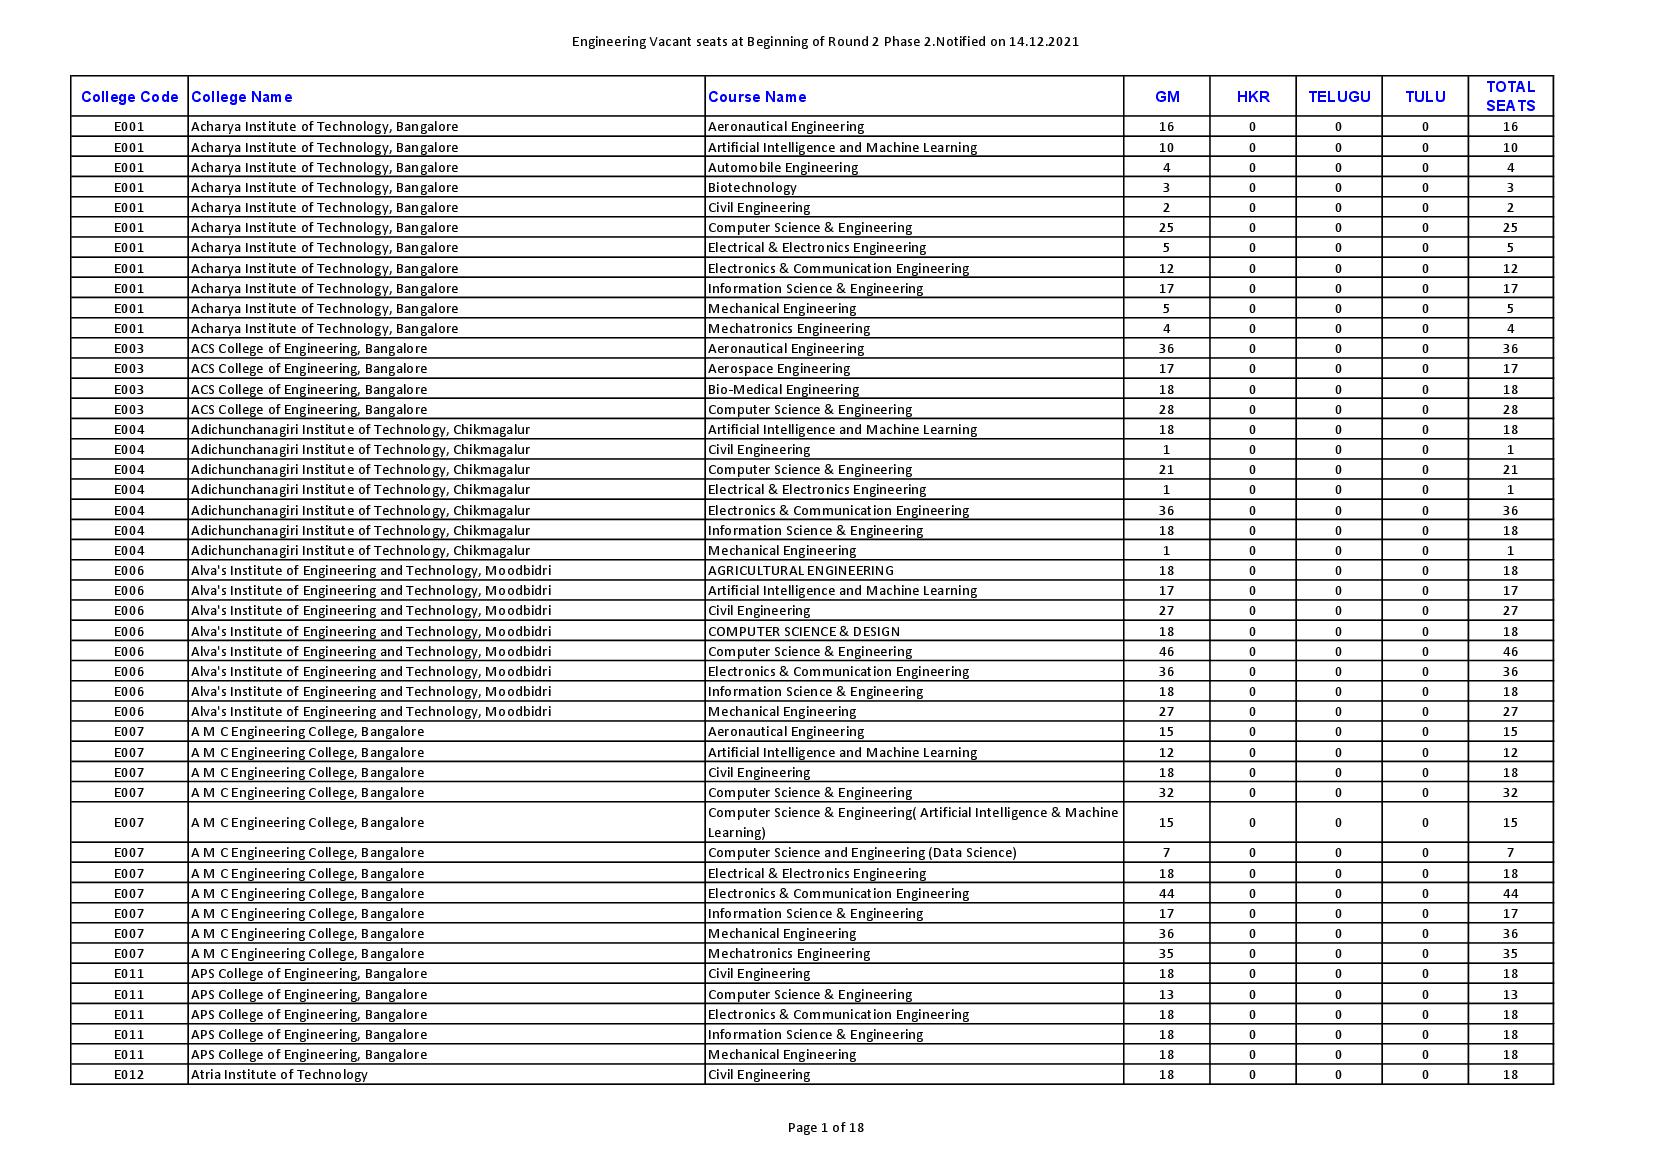 COMEDK 2021 Engineering Vacant seats at Beginning of Round 2, Phase 2 - Page 1